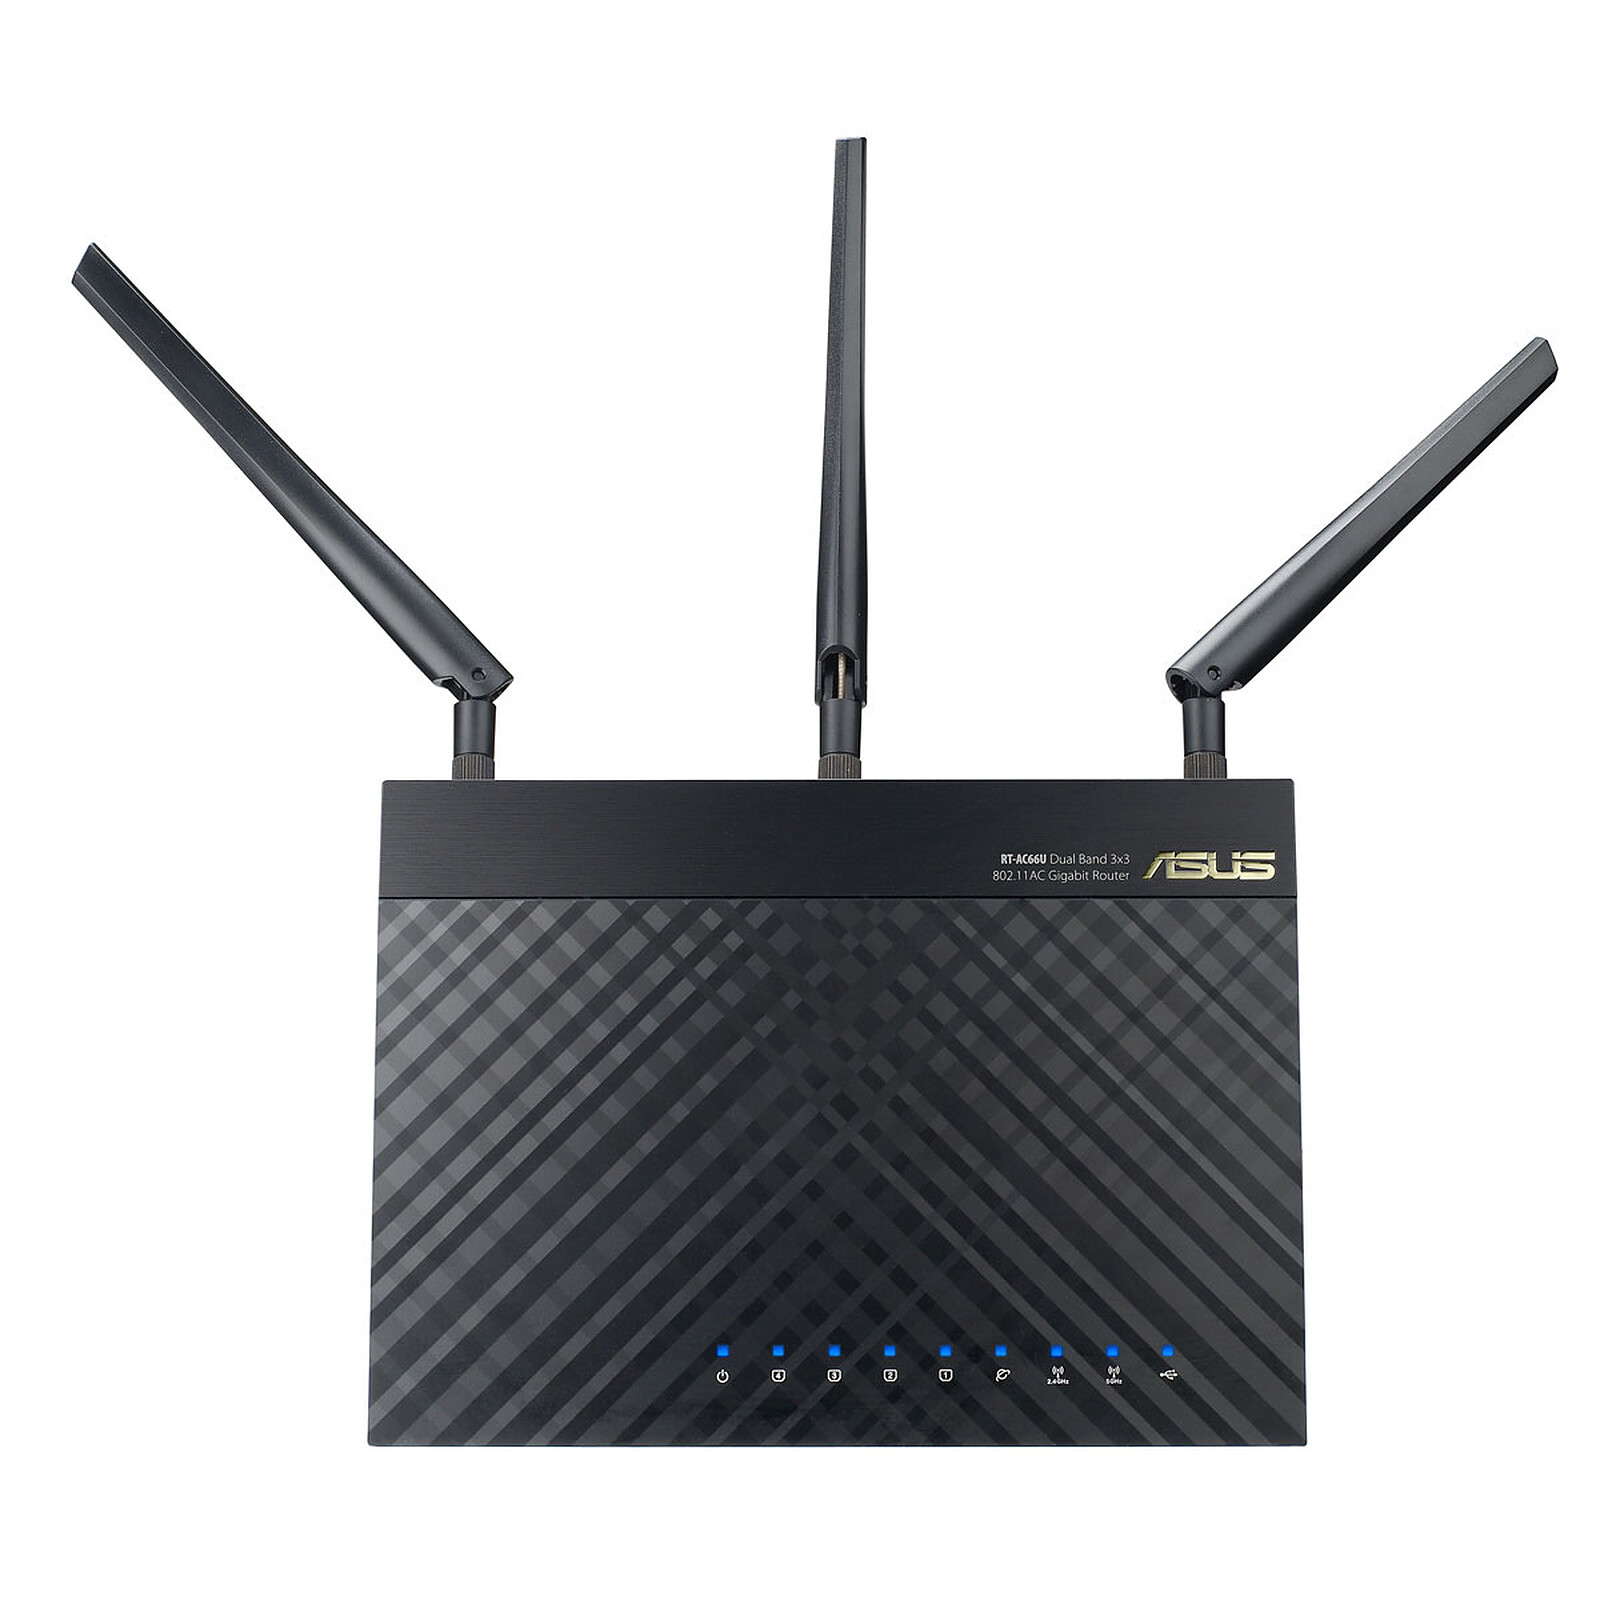 RT-AC66U - & router on LDLC